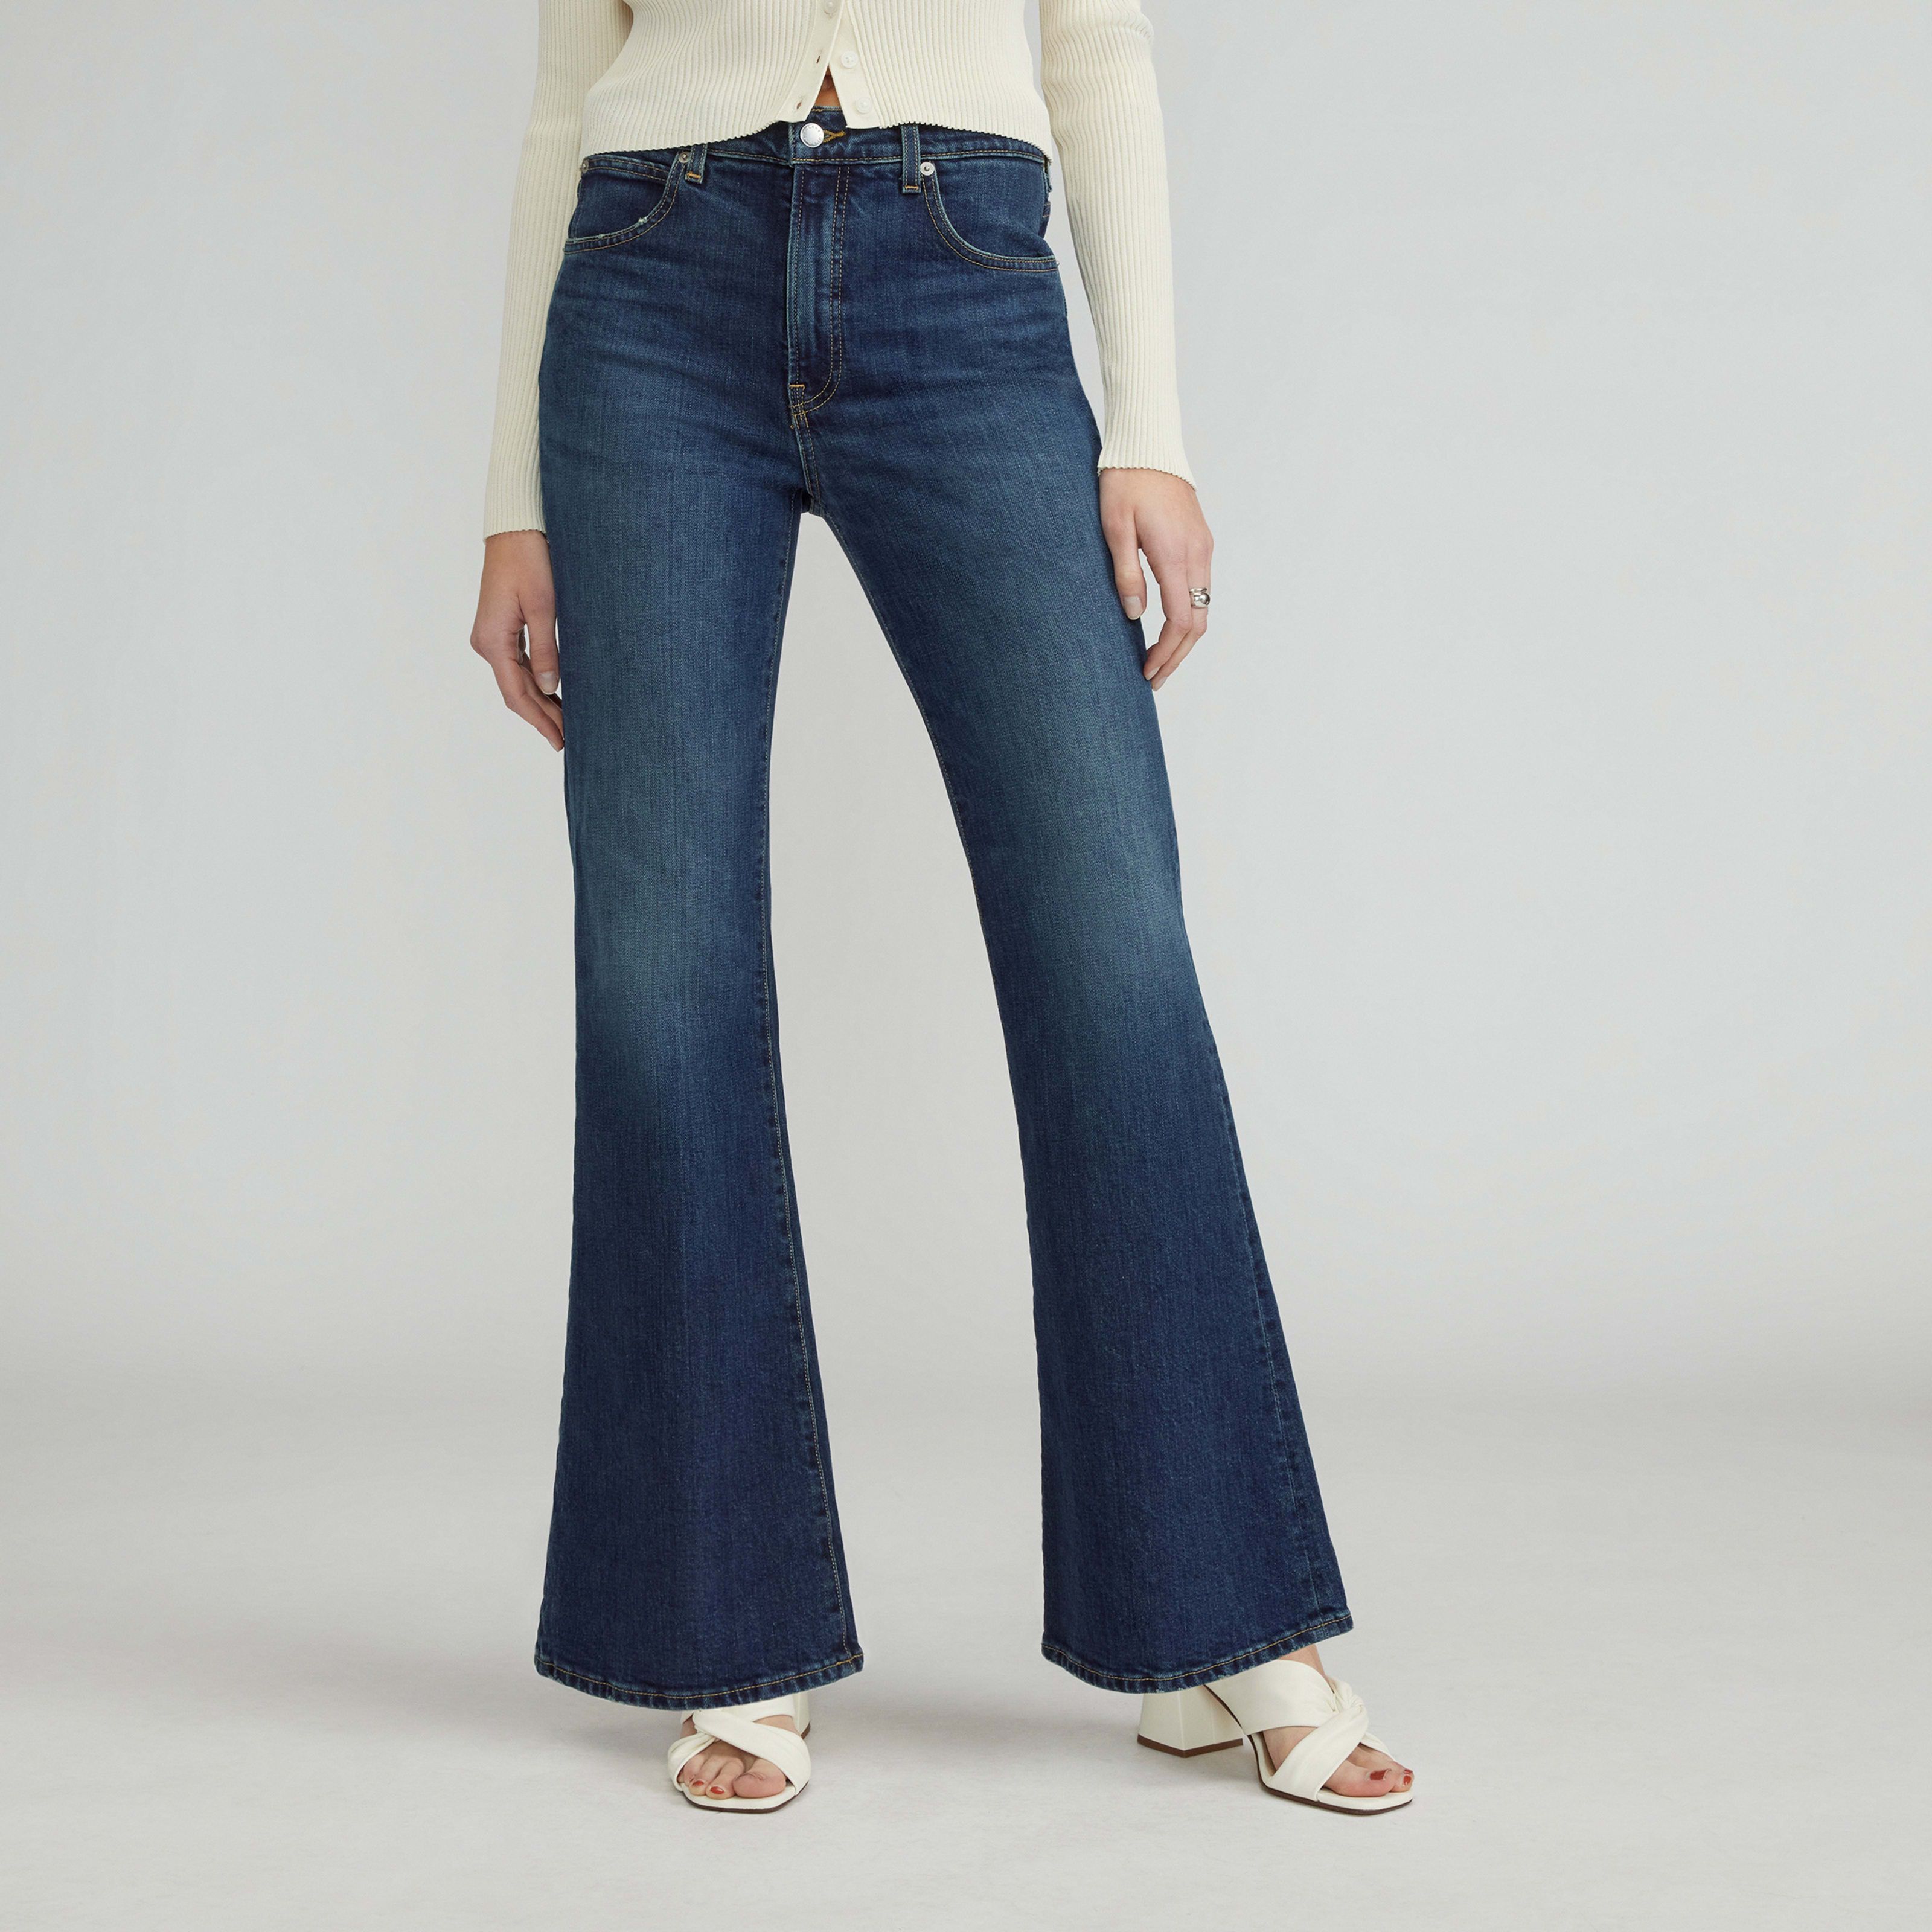 Women's High-Rise Flare Jean by Everlane in Deep Blue, Size 26 | Everlane